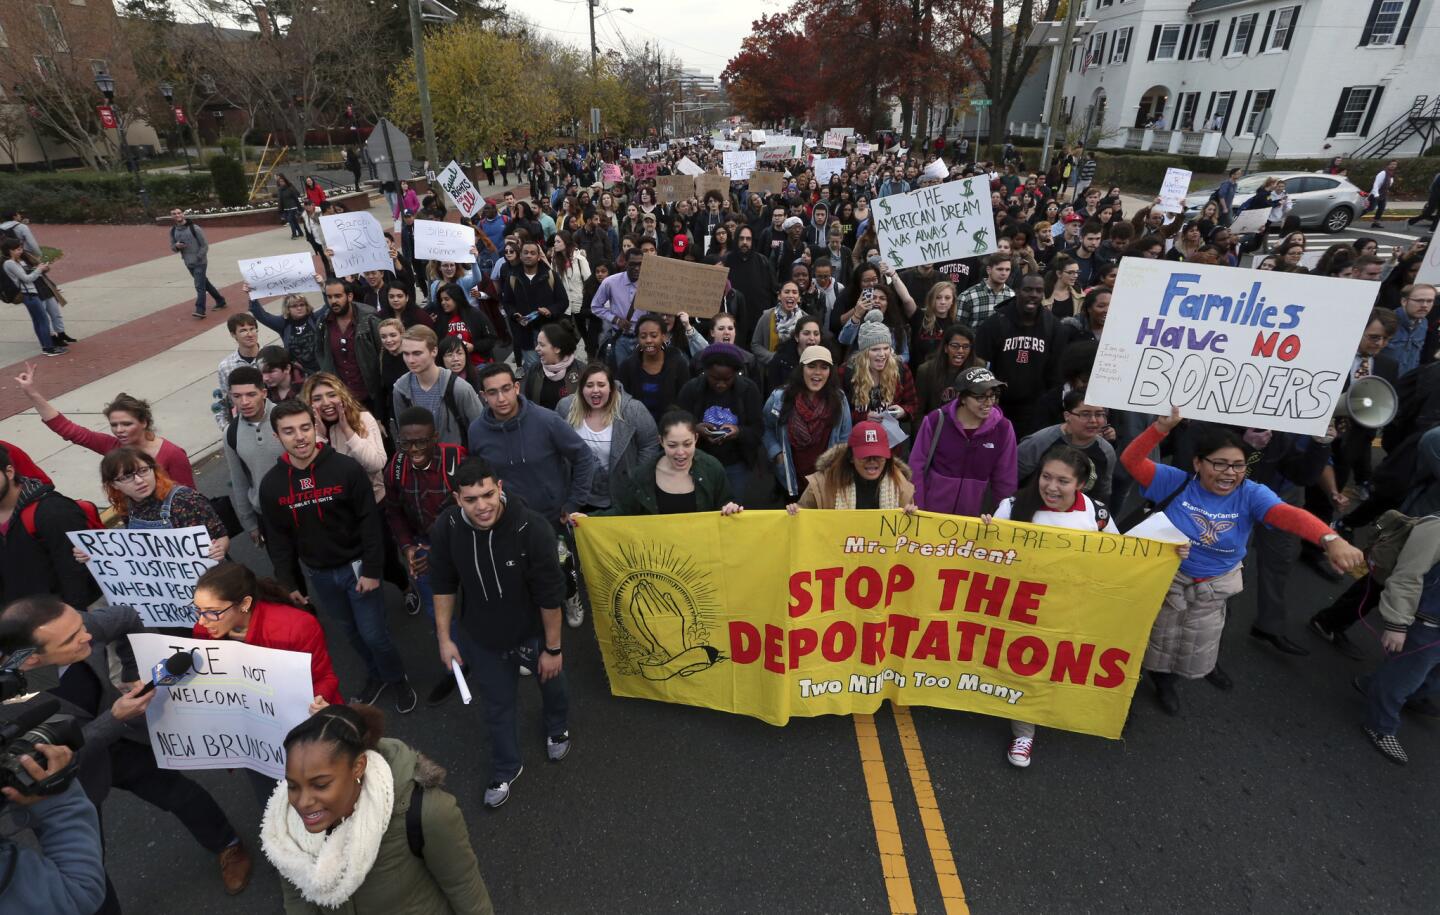 Hundreds of Rutgers University students march to protest President-elect Donald Trump's policies and to ask school officials to denounce his plans on Wednesday, Nov. 16, 2016, in New Brunswick, N.J.